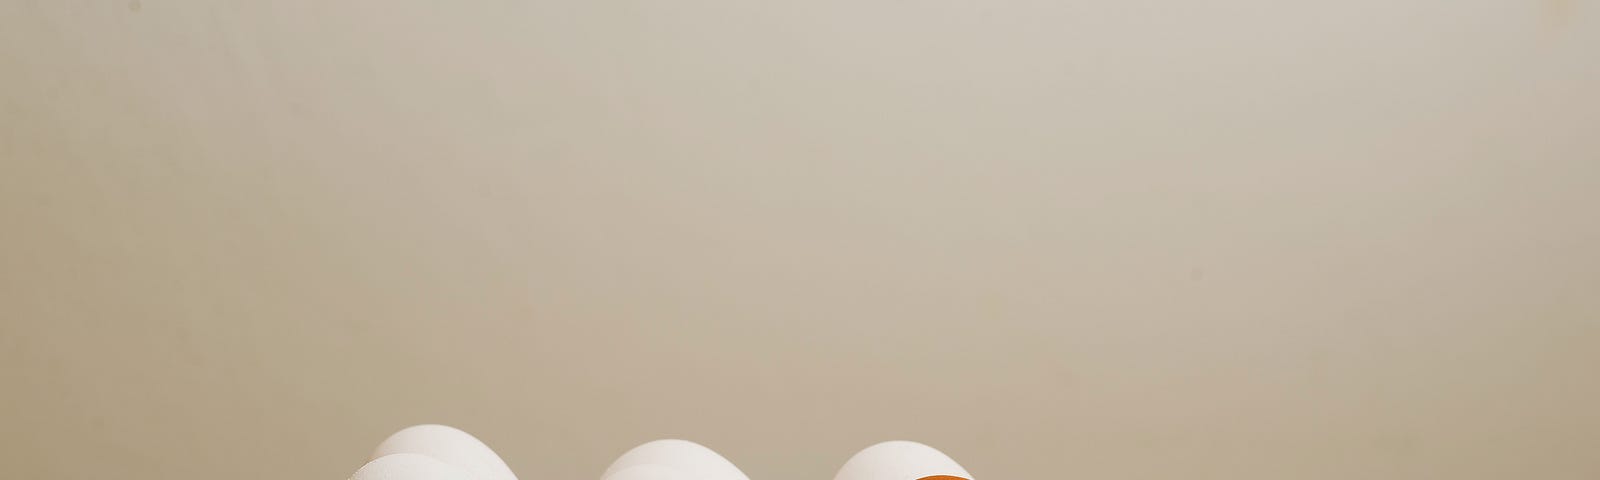 There are six eggs sitting in a egg carton made of glass. Five of them are white, one of them is orange. All of the eggs have cartoon faces. The white eggs look angry at the orange egg, and the orange egg looks scared.